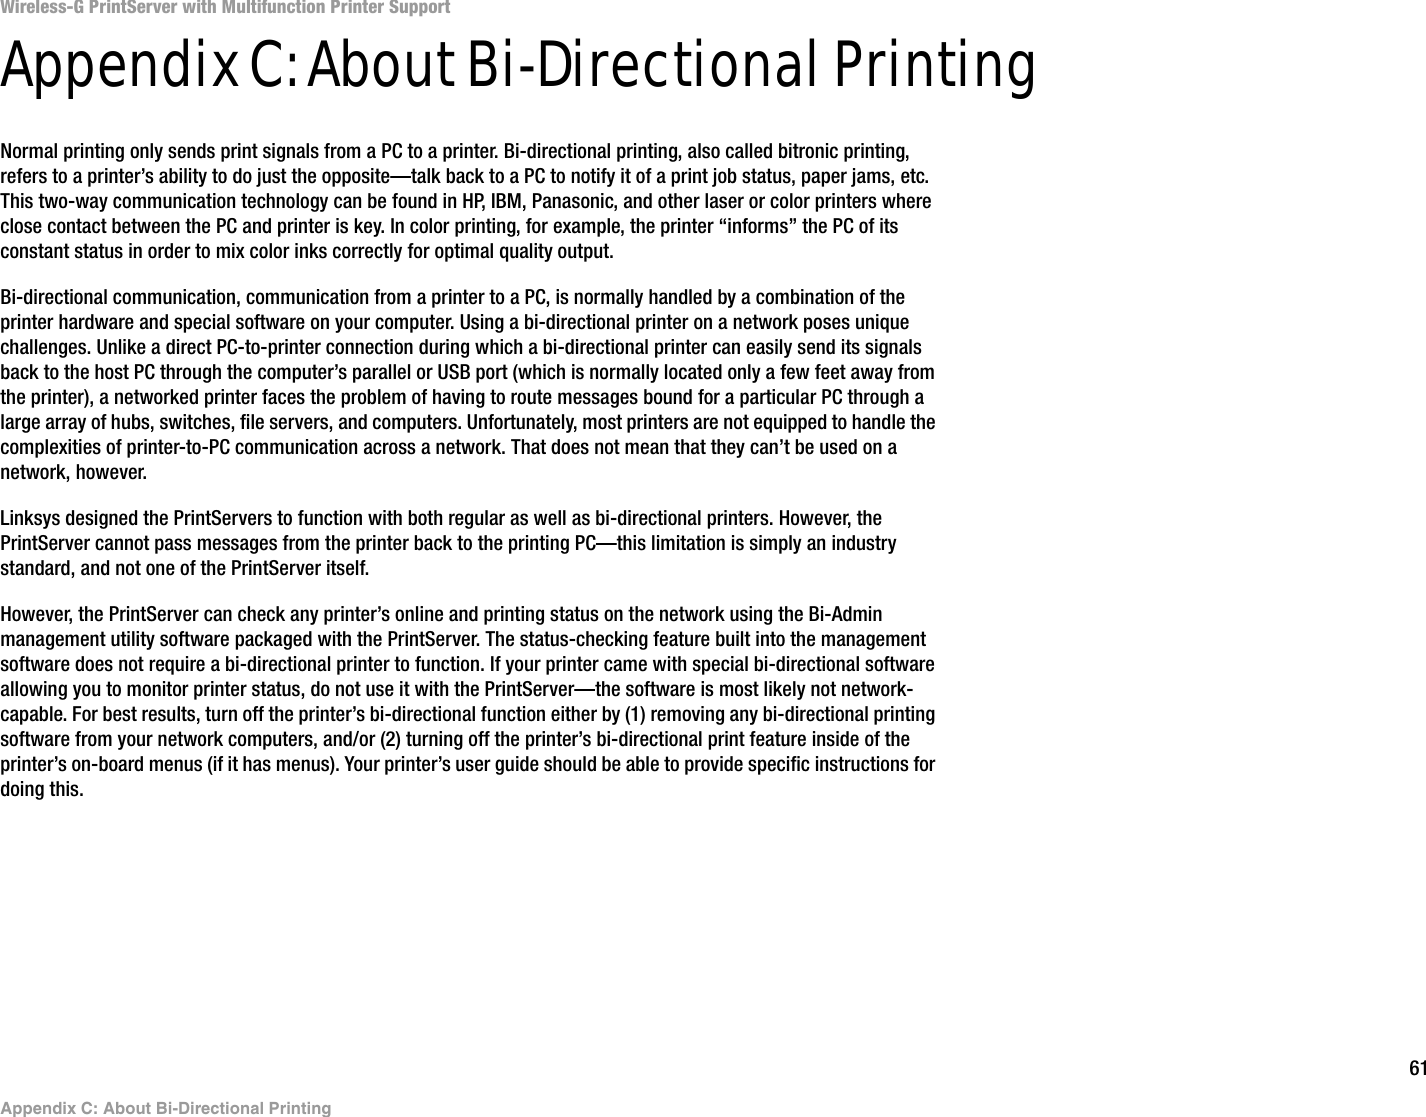 61Appendix C: About Bi-Directional PrintingWireless-G PrintServer with Multifunction Printer SupportAppendix C: About Bi-Directional PrintingNormal printing only sends print signals from a PC to a printer. Bi-directional printing, also called bitronic printing, refers to a printer’s ability to do just the opposite—talk back to a PC to notify it of a print job status, paper jams, etc. This two-way communication technology can be found in HP, IBM, Panasonic, and other laser or color printers where close contact between the PC and printer is key. In color printing, for example, the printer “informs” the PC of its constant status in order to mix color inks correctly for optimal quality output. Bi-directional communication, communication from a printer to a PC, is normally handled by a combination of the printer hardware and special software on your computer. Using a bi-directional printer on a network poses unique challenges. Unlike a direct PC-to-printer connection during which a bi-directional printer can easily send its signals back to the host PC through the computer’s parallel or USB port (which is normally located only a few feet away from the printer), a networked printer faces the problem of having to route messages bound for a particular PC through a large array of hubs, switches, file servers, and computers. Unfortunately, most printers are not equipped to handle the complexities of printer-to-PC communication across a network. That does not mean that they can’t be used on a network, however.Linksys designed the PrintServers to function with both regular as well as bi-directional printers. However, the PrintServer cannot pass messages from the printer back to the printing PC—this limitation is simply an industry standard, and not one of the PrintServer itself.However, the PrintServer can check any printer’s online and printing status on the network using the Bi-Admin management utility software packaged with the PrintServer. The status-checking feature built into the management software does not require a bi-directional printer to function. If your printer came with special bi-directional software allowing you to monitor printer status, do not use it with the PrintServer—the software is most likely not network-capable. For best results, turn off the printer’s bi-directional function either by (1) removing any bi-directional printing software from your network computers, and/or (2) turning off the printer’s bi-directional print feature inside of the printer’s on-board menus (if it has menus). Your printer’s user guide should be able to provide specific instructions for doing this.